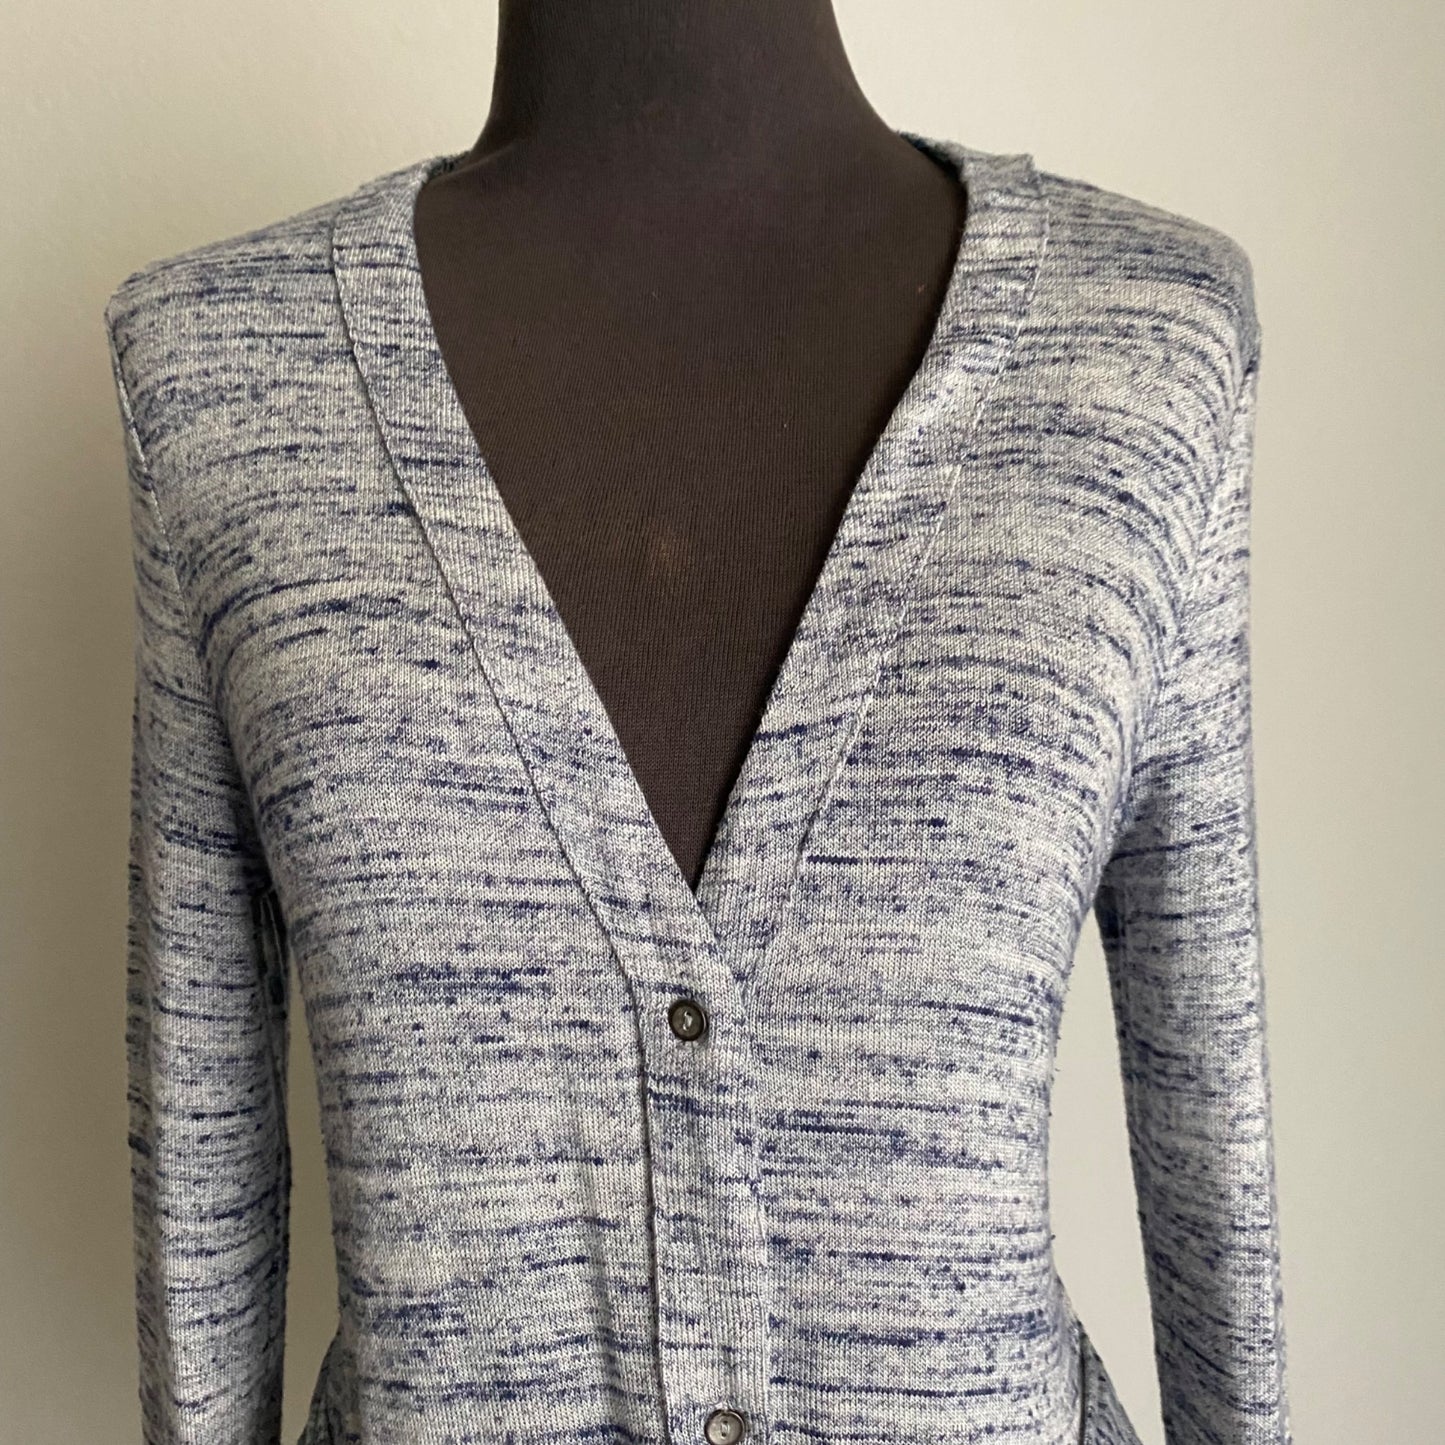 Anthro Dolan Left Coast Collection sz S Long sleeve button down front with belt